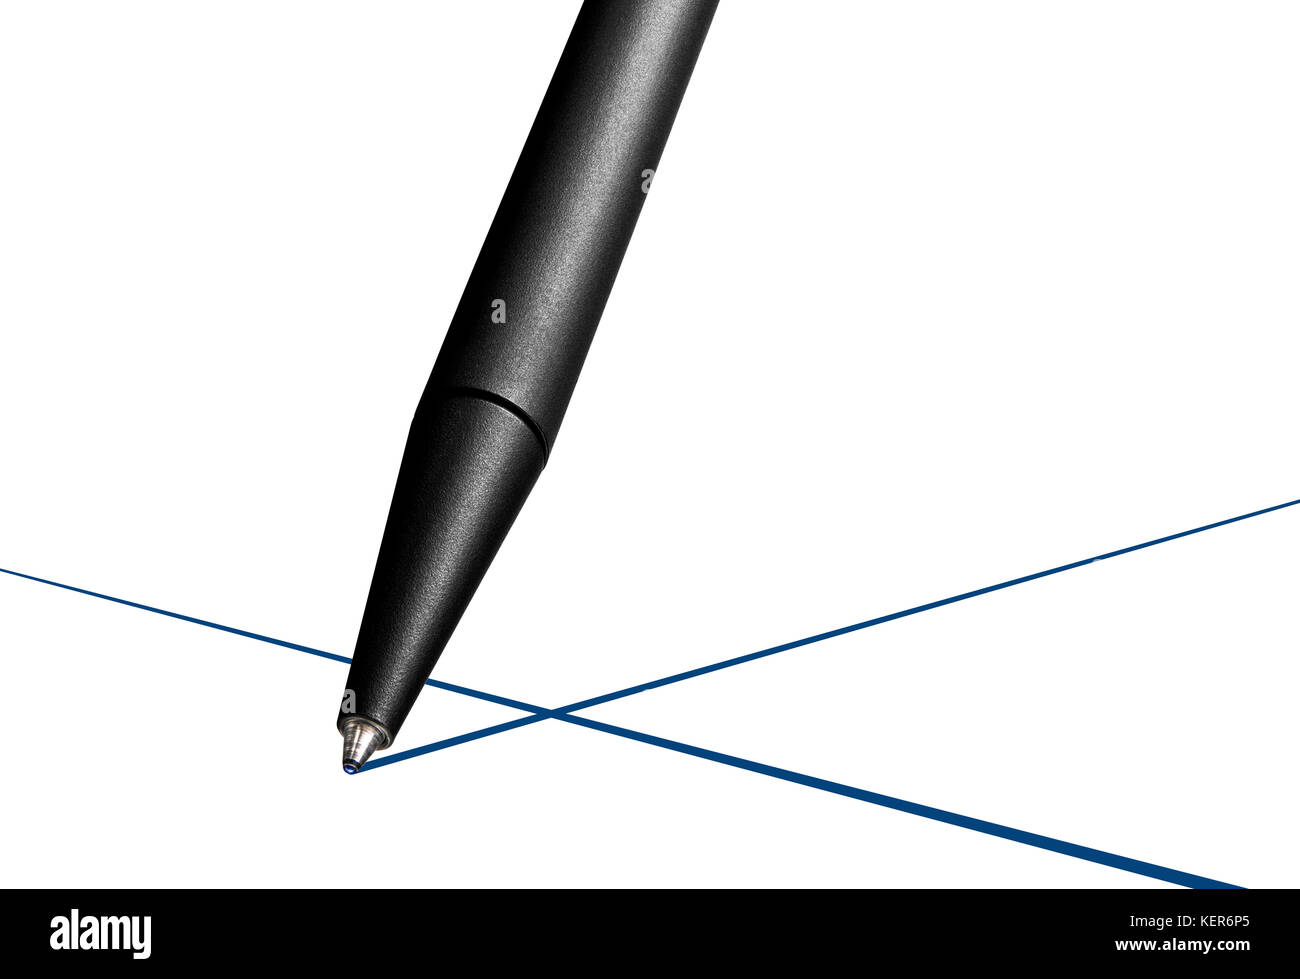 Conceptual photo illustration of ball point pen close up as it traces an ink line Stock Photo